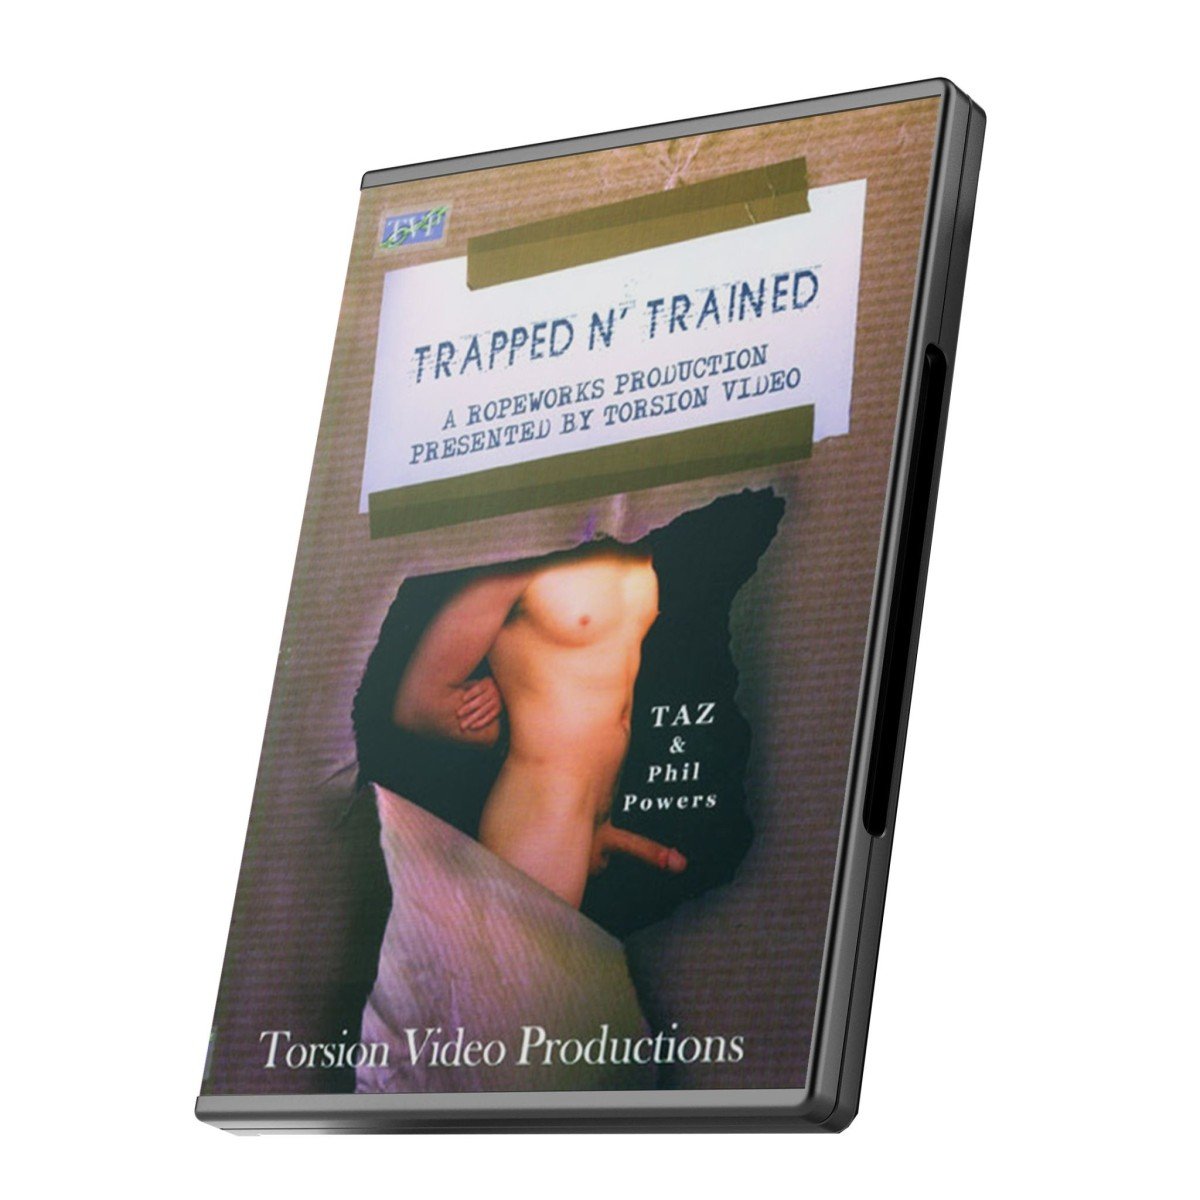 Torsion Video: Trapped N’ Trained DVD